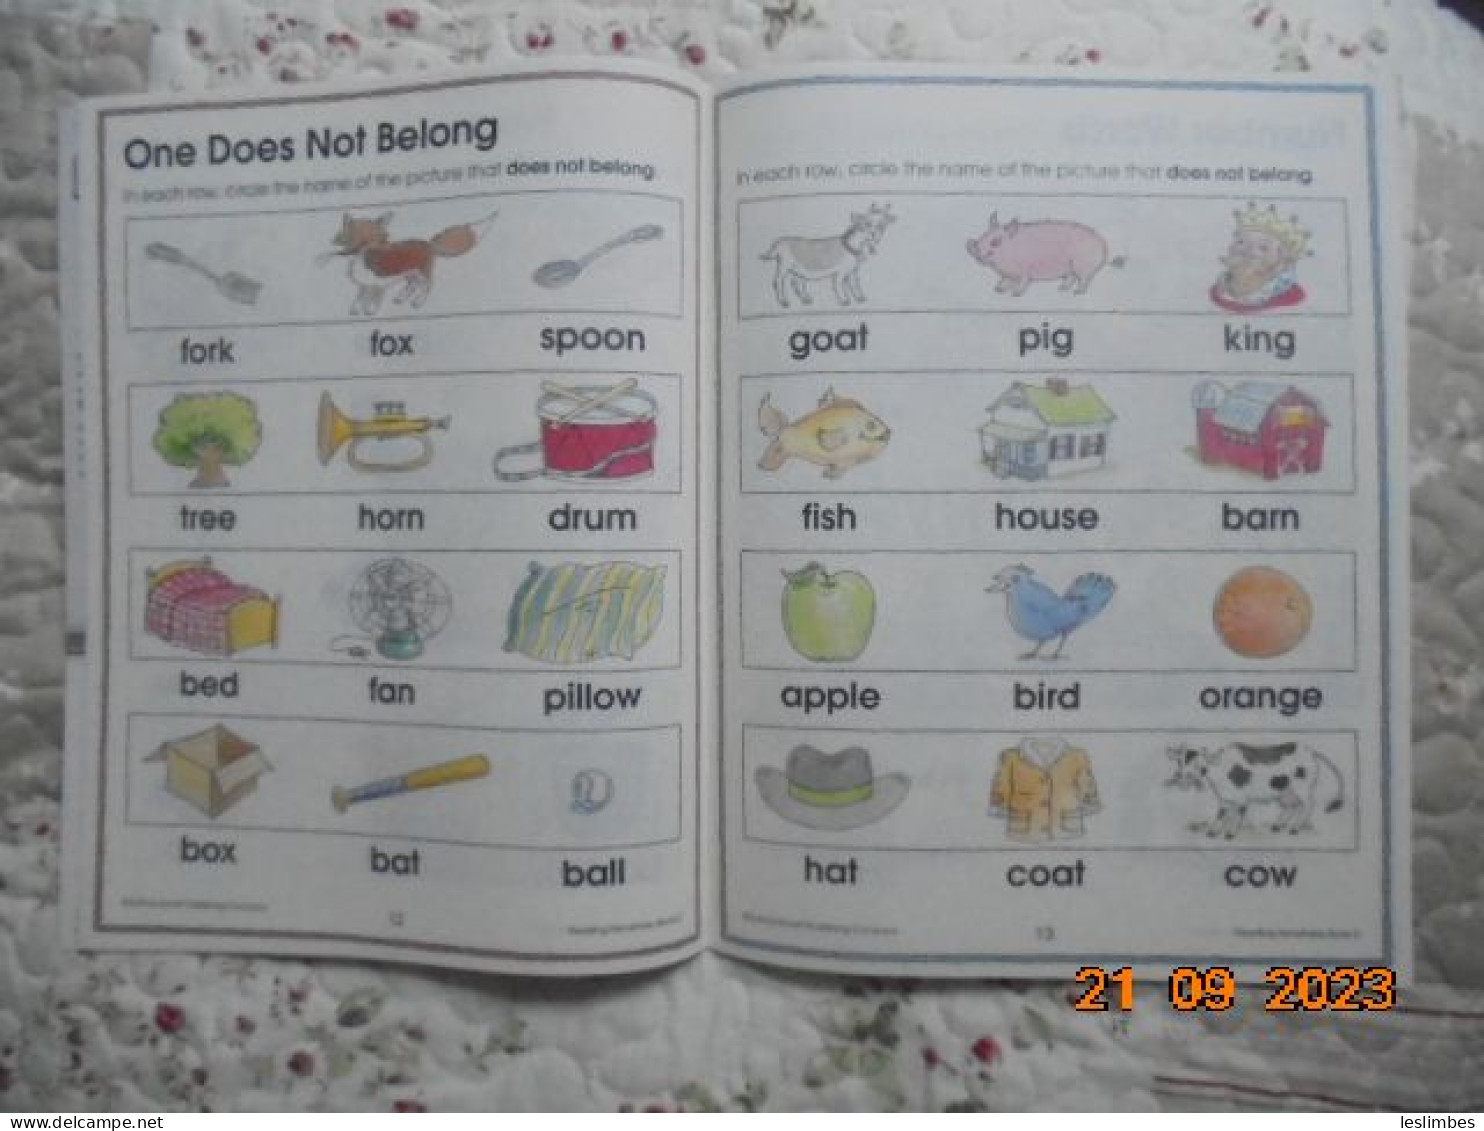 2015 School Zone "I Know It!" Reading Readiness Grades K-1 (ages 5-7) Book 2 - Engelse Taal/Grammatica